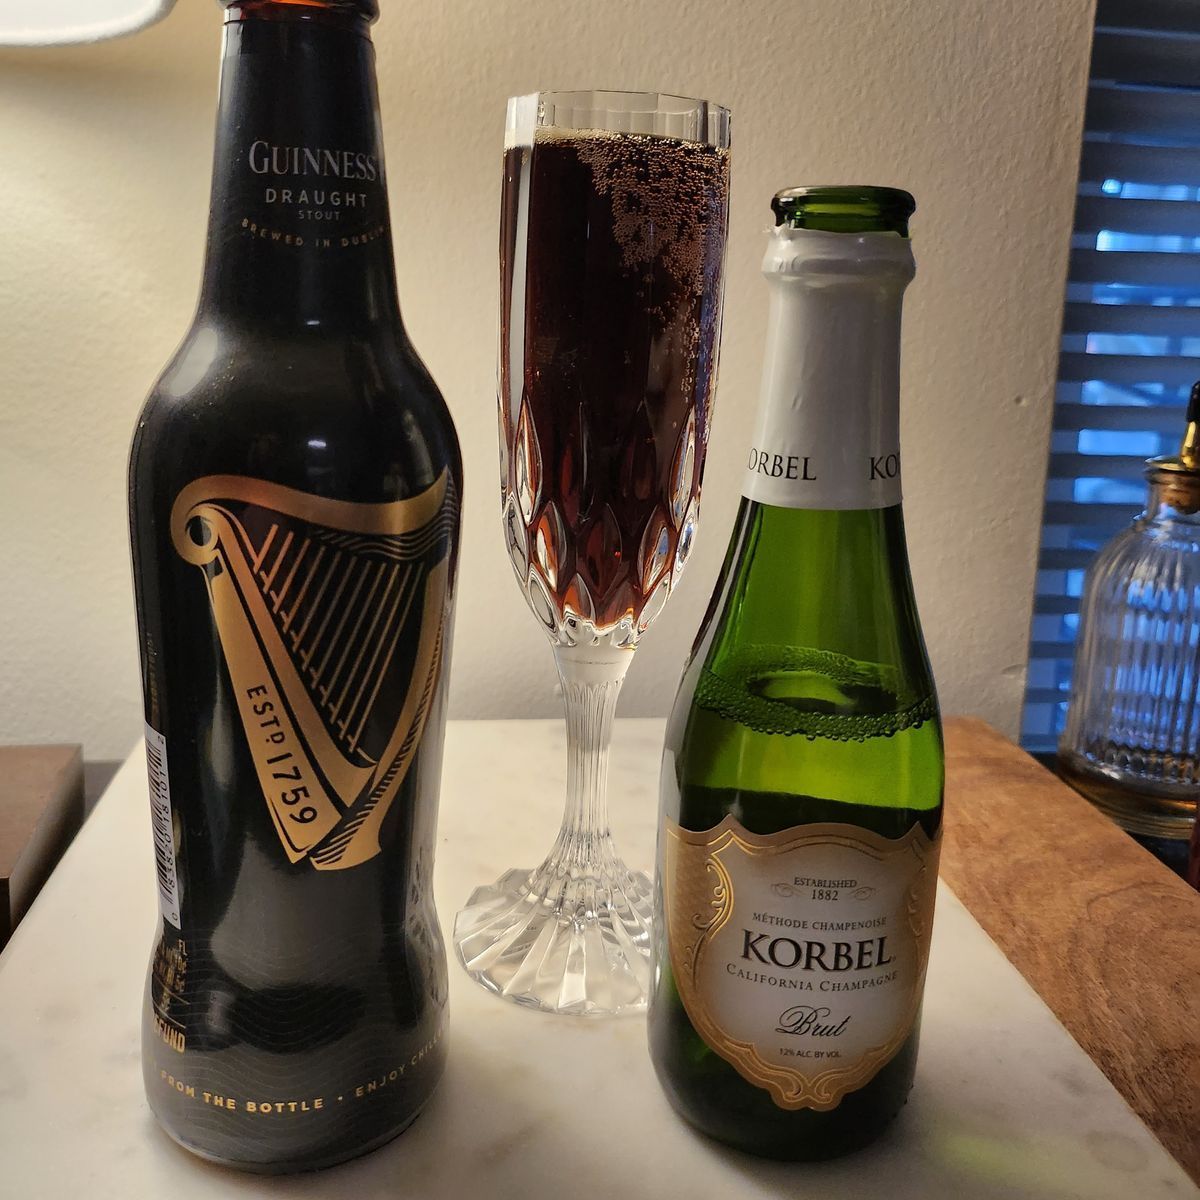 Originally created in 1861 to mourn the death of Prince Albert, this is a classic champagne-and-beer highball with the stout floated on top of the champagne